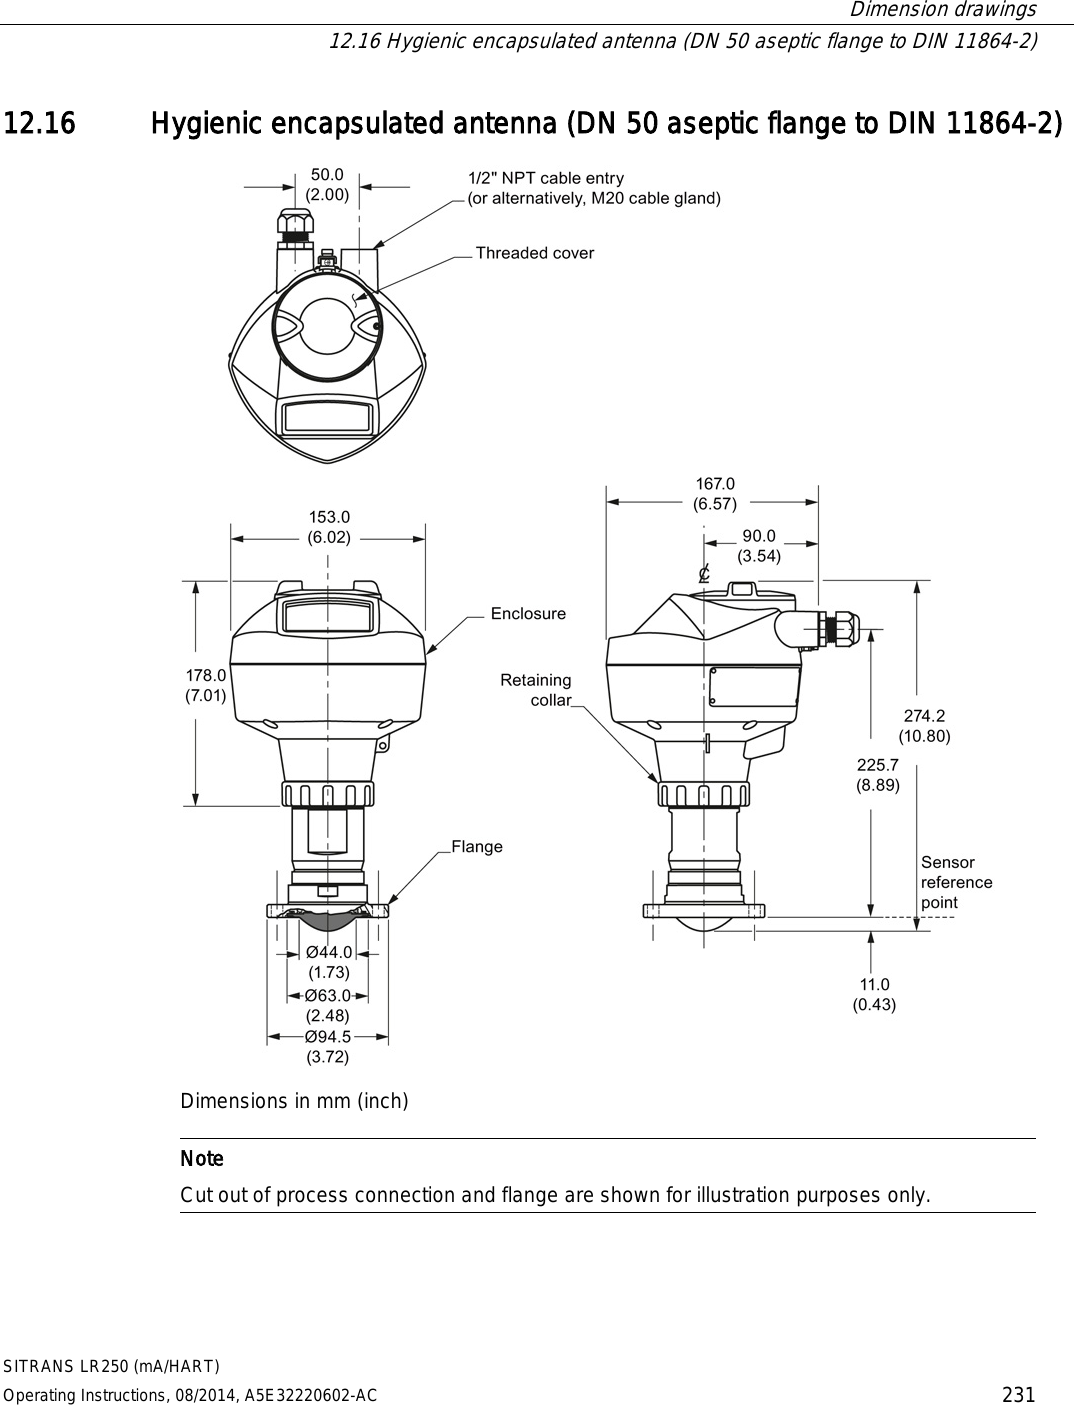  Dimension drawings  12.16 Hygienic encapsulated antenna (DN 50 aseptic flange to DIN 11864-2) SITRANS LR250 (mA/HART) Operating Instructions, 08/2014, A5E32220602-AC 231 12.16 Hygienic encapsulated antenna (DN 50 aseptic flange to DIN 11864-2)  Dimensions in mm (inch)   Note Cut out of process connection and flange are shown for illustration purposes only.   